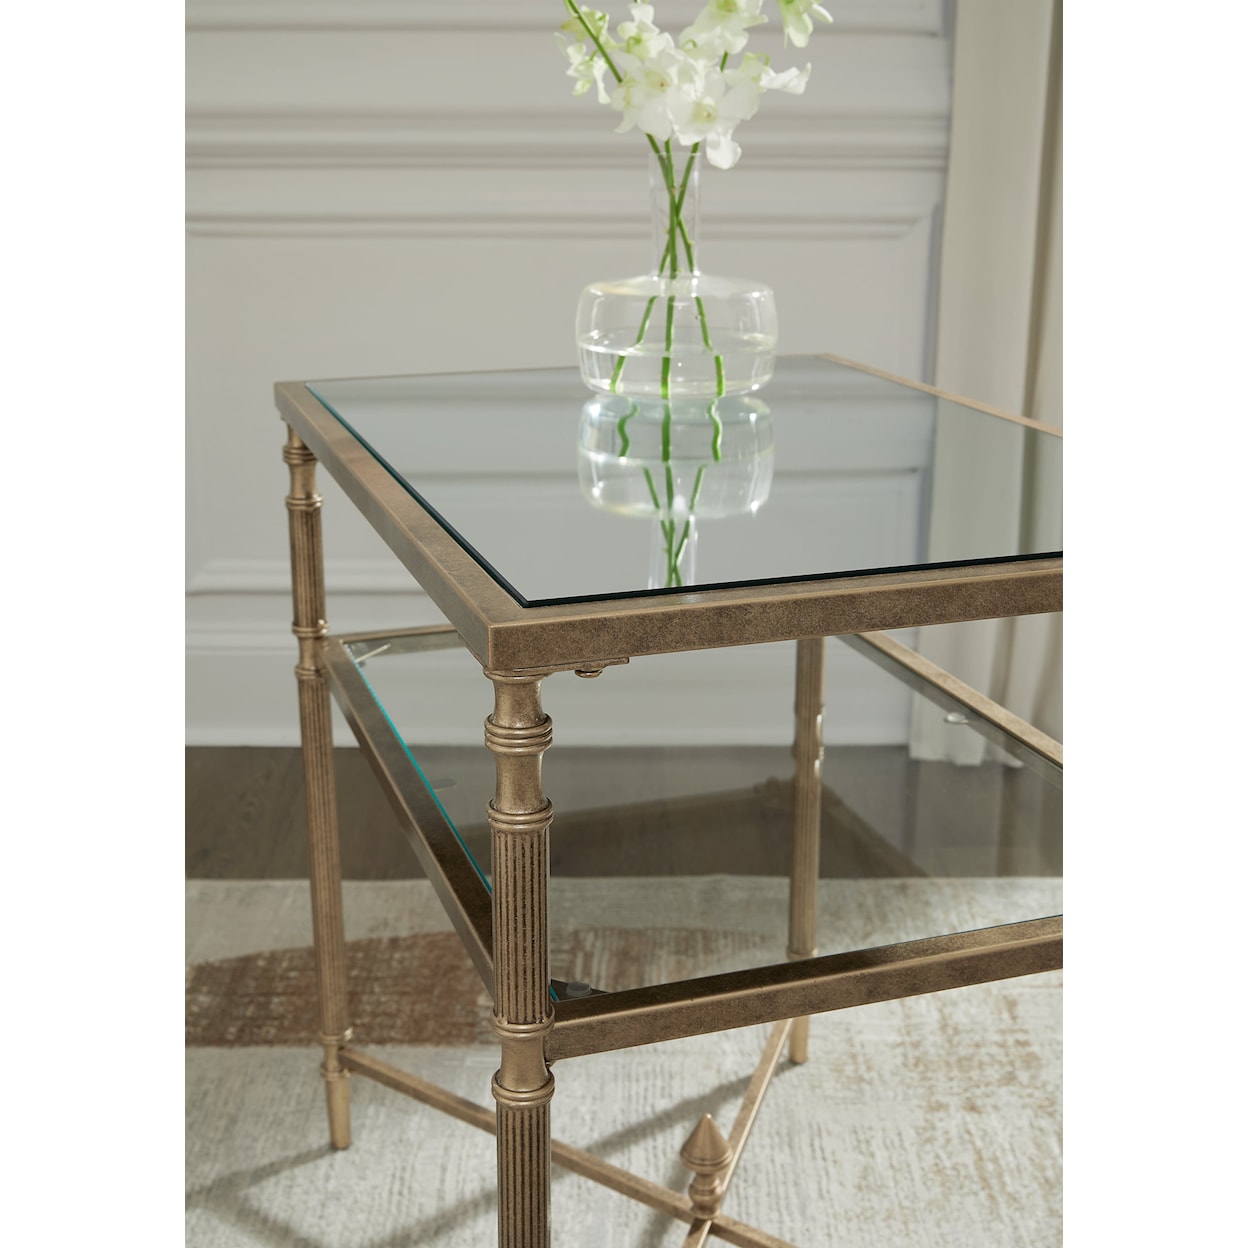 Benchcraft Cloverty Rectangular End Table